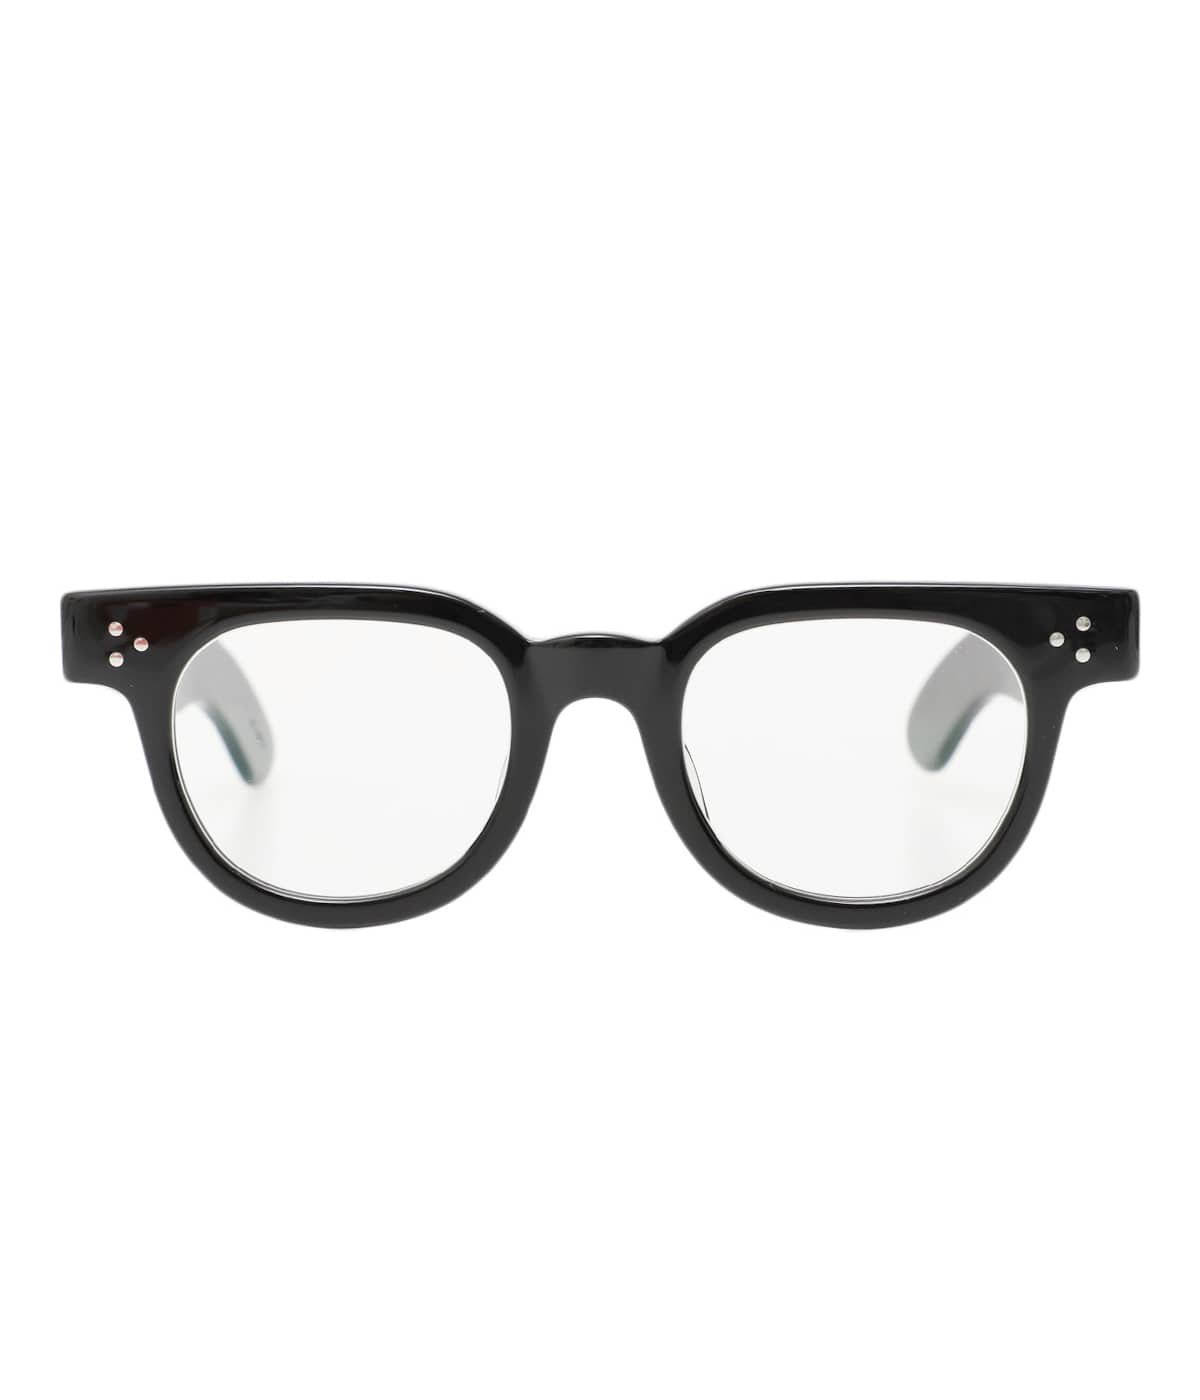 FDR 46-22 - BLACK / CLEAR -